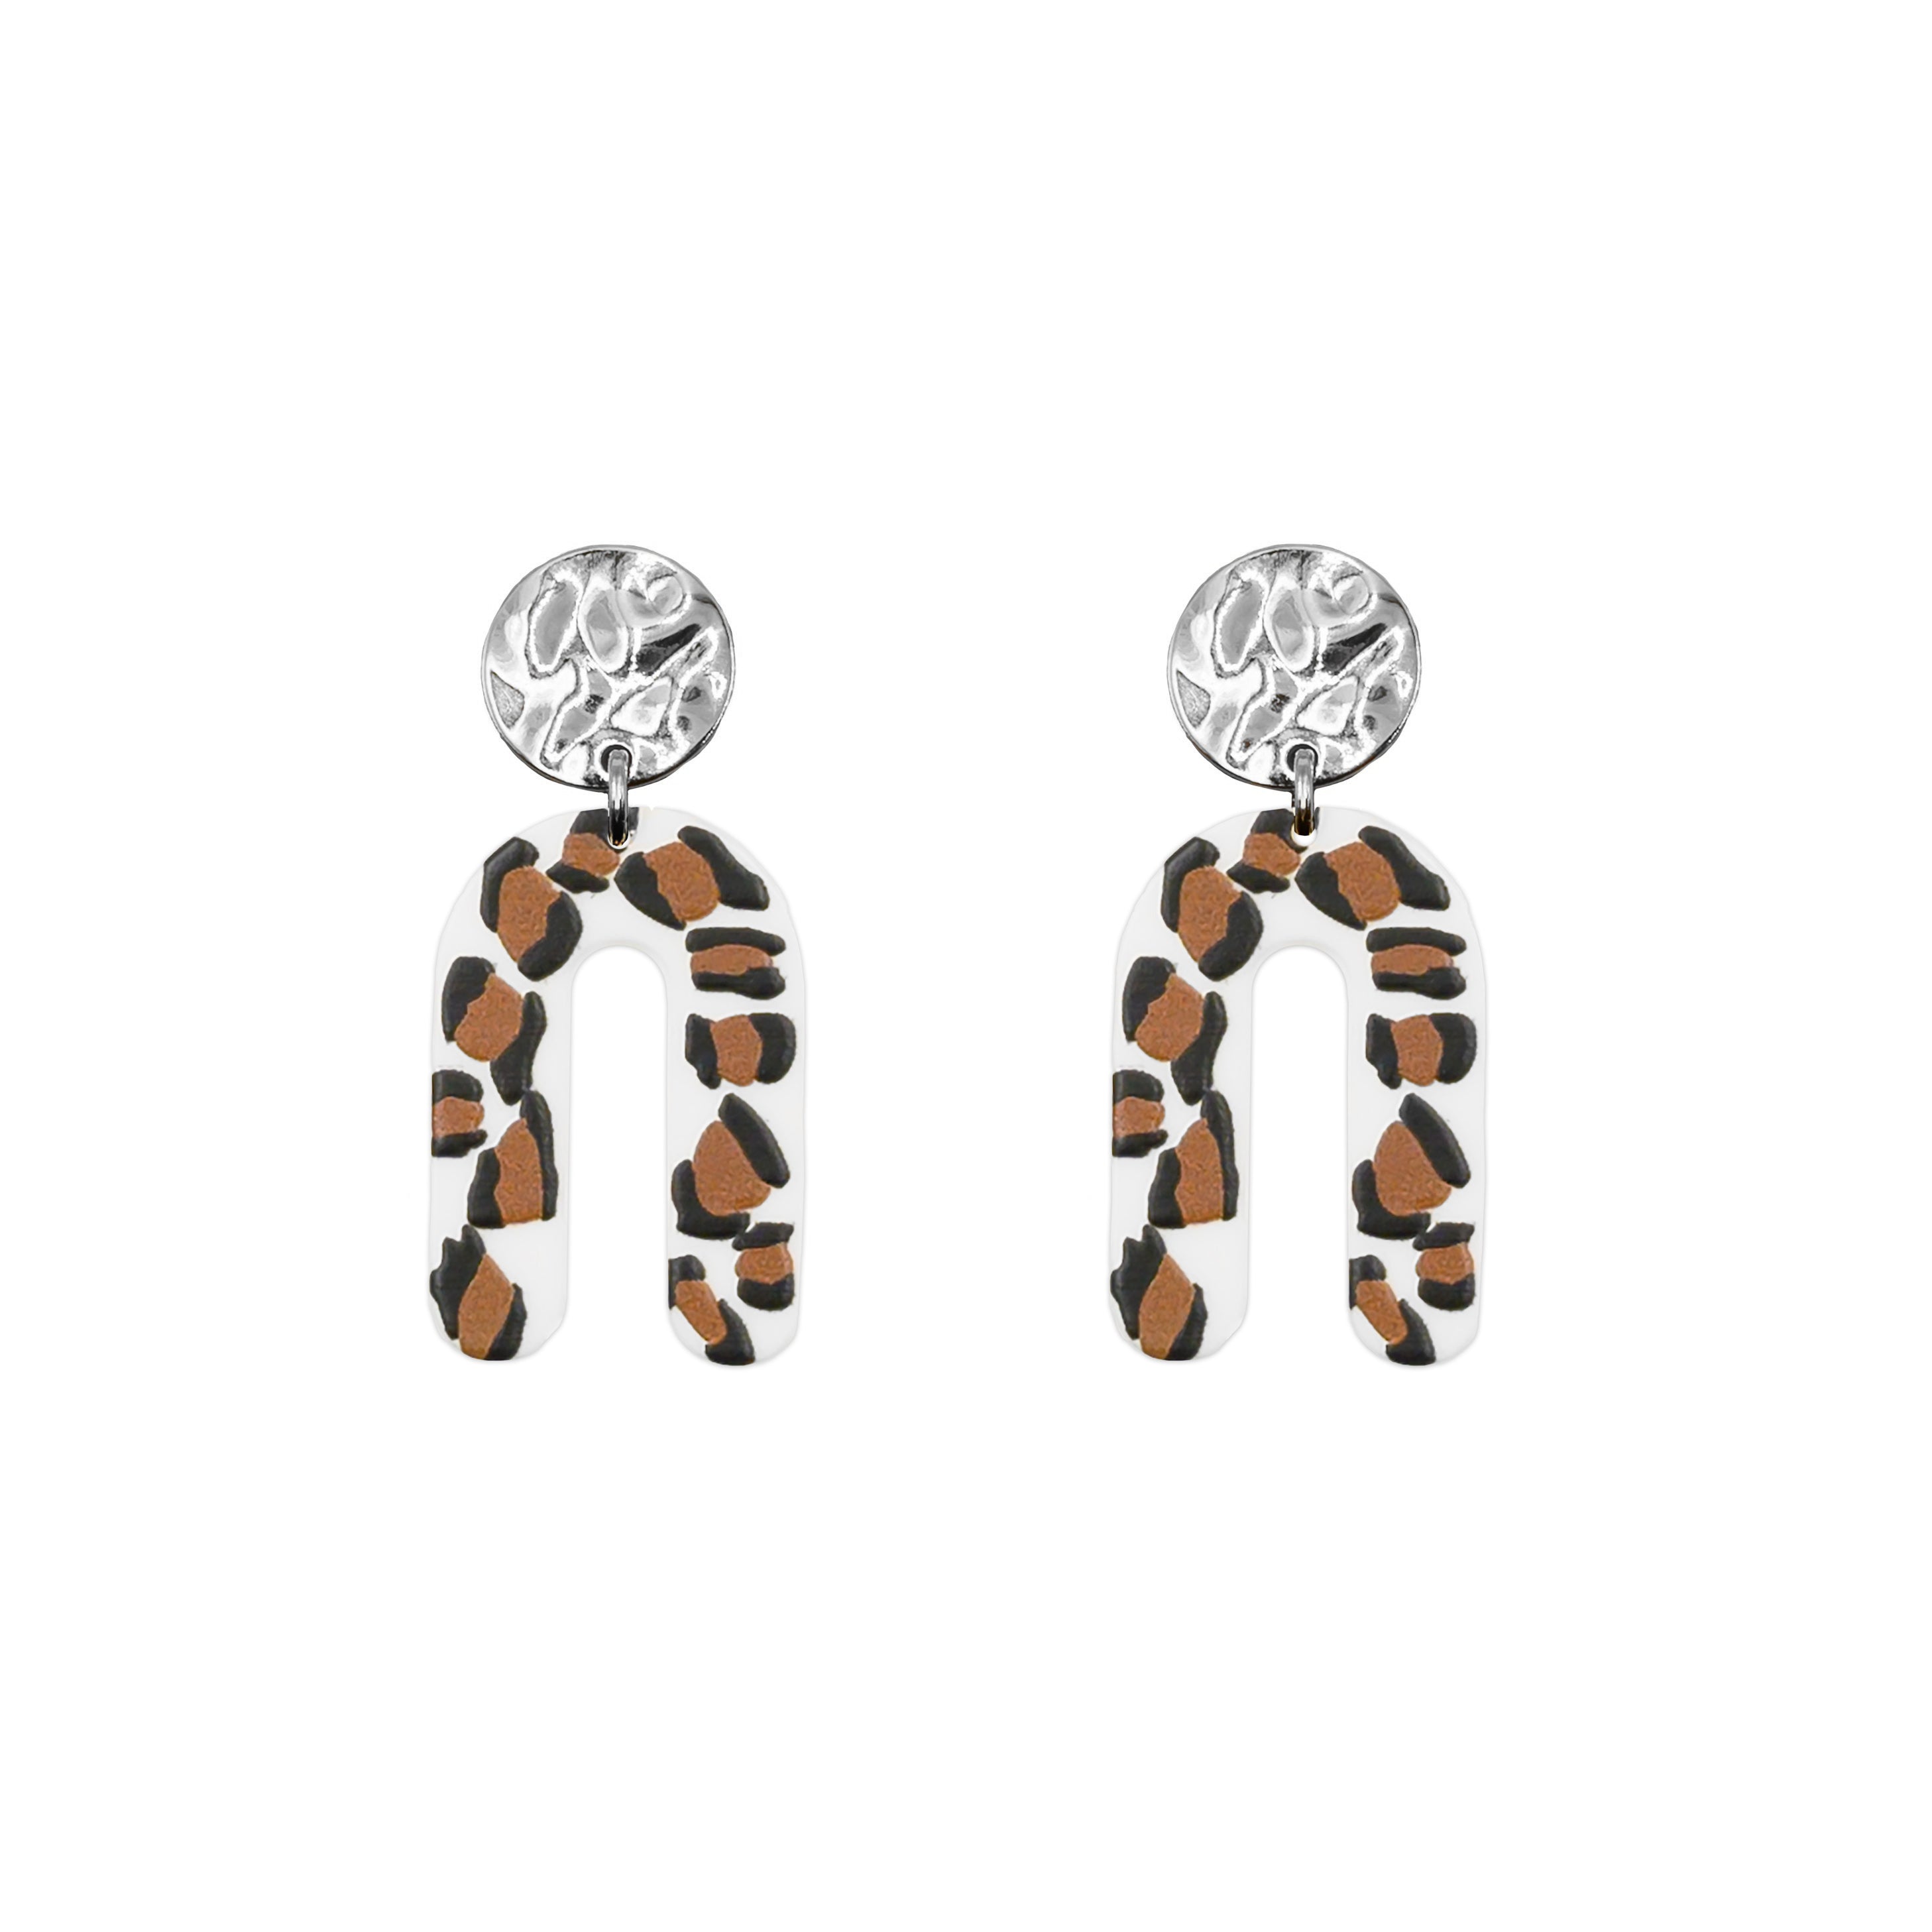 Rayne Collection - Silver Kamilah Earrings fine designer jewelry for men and women